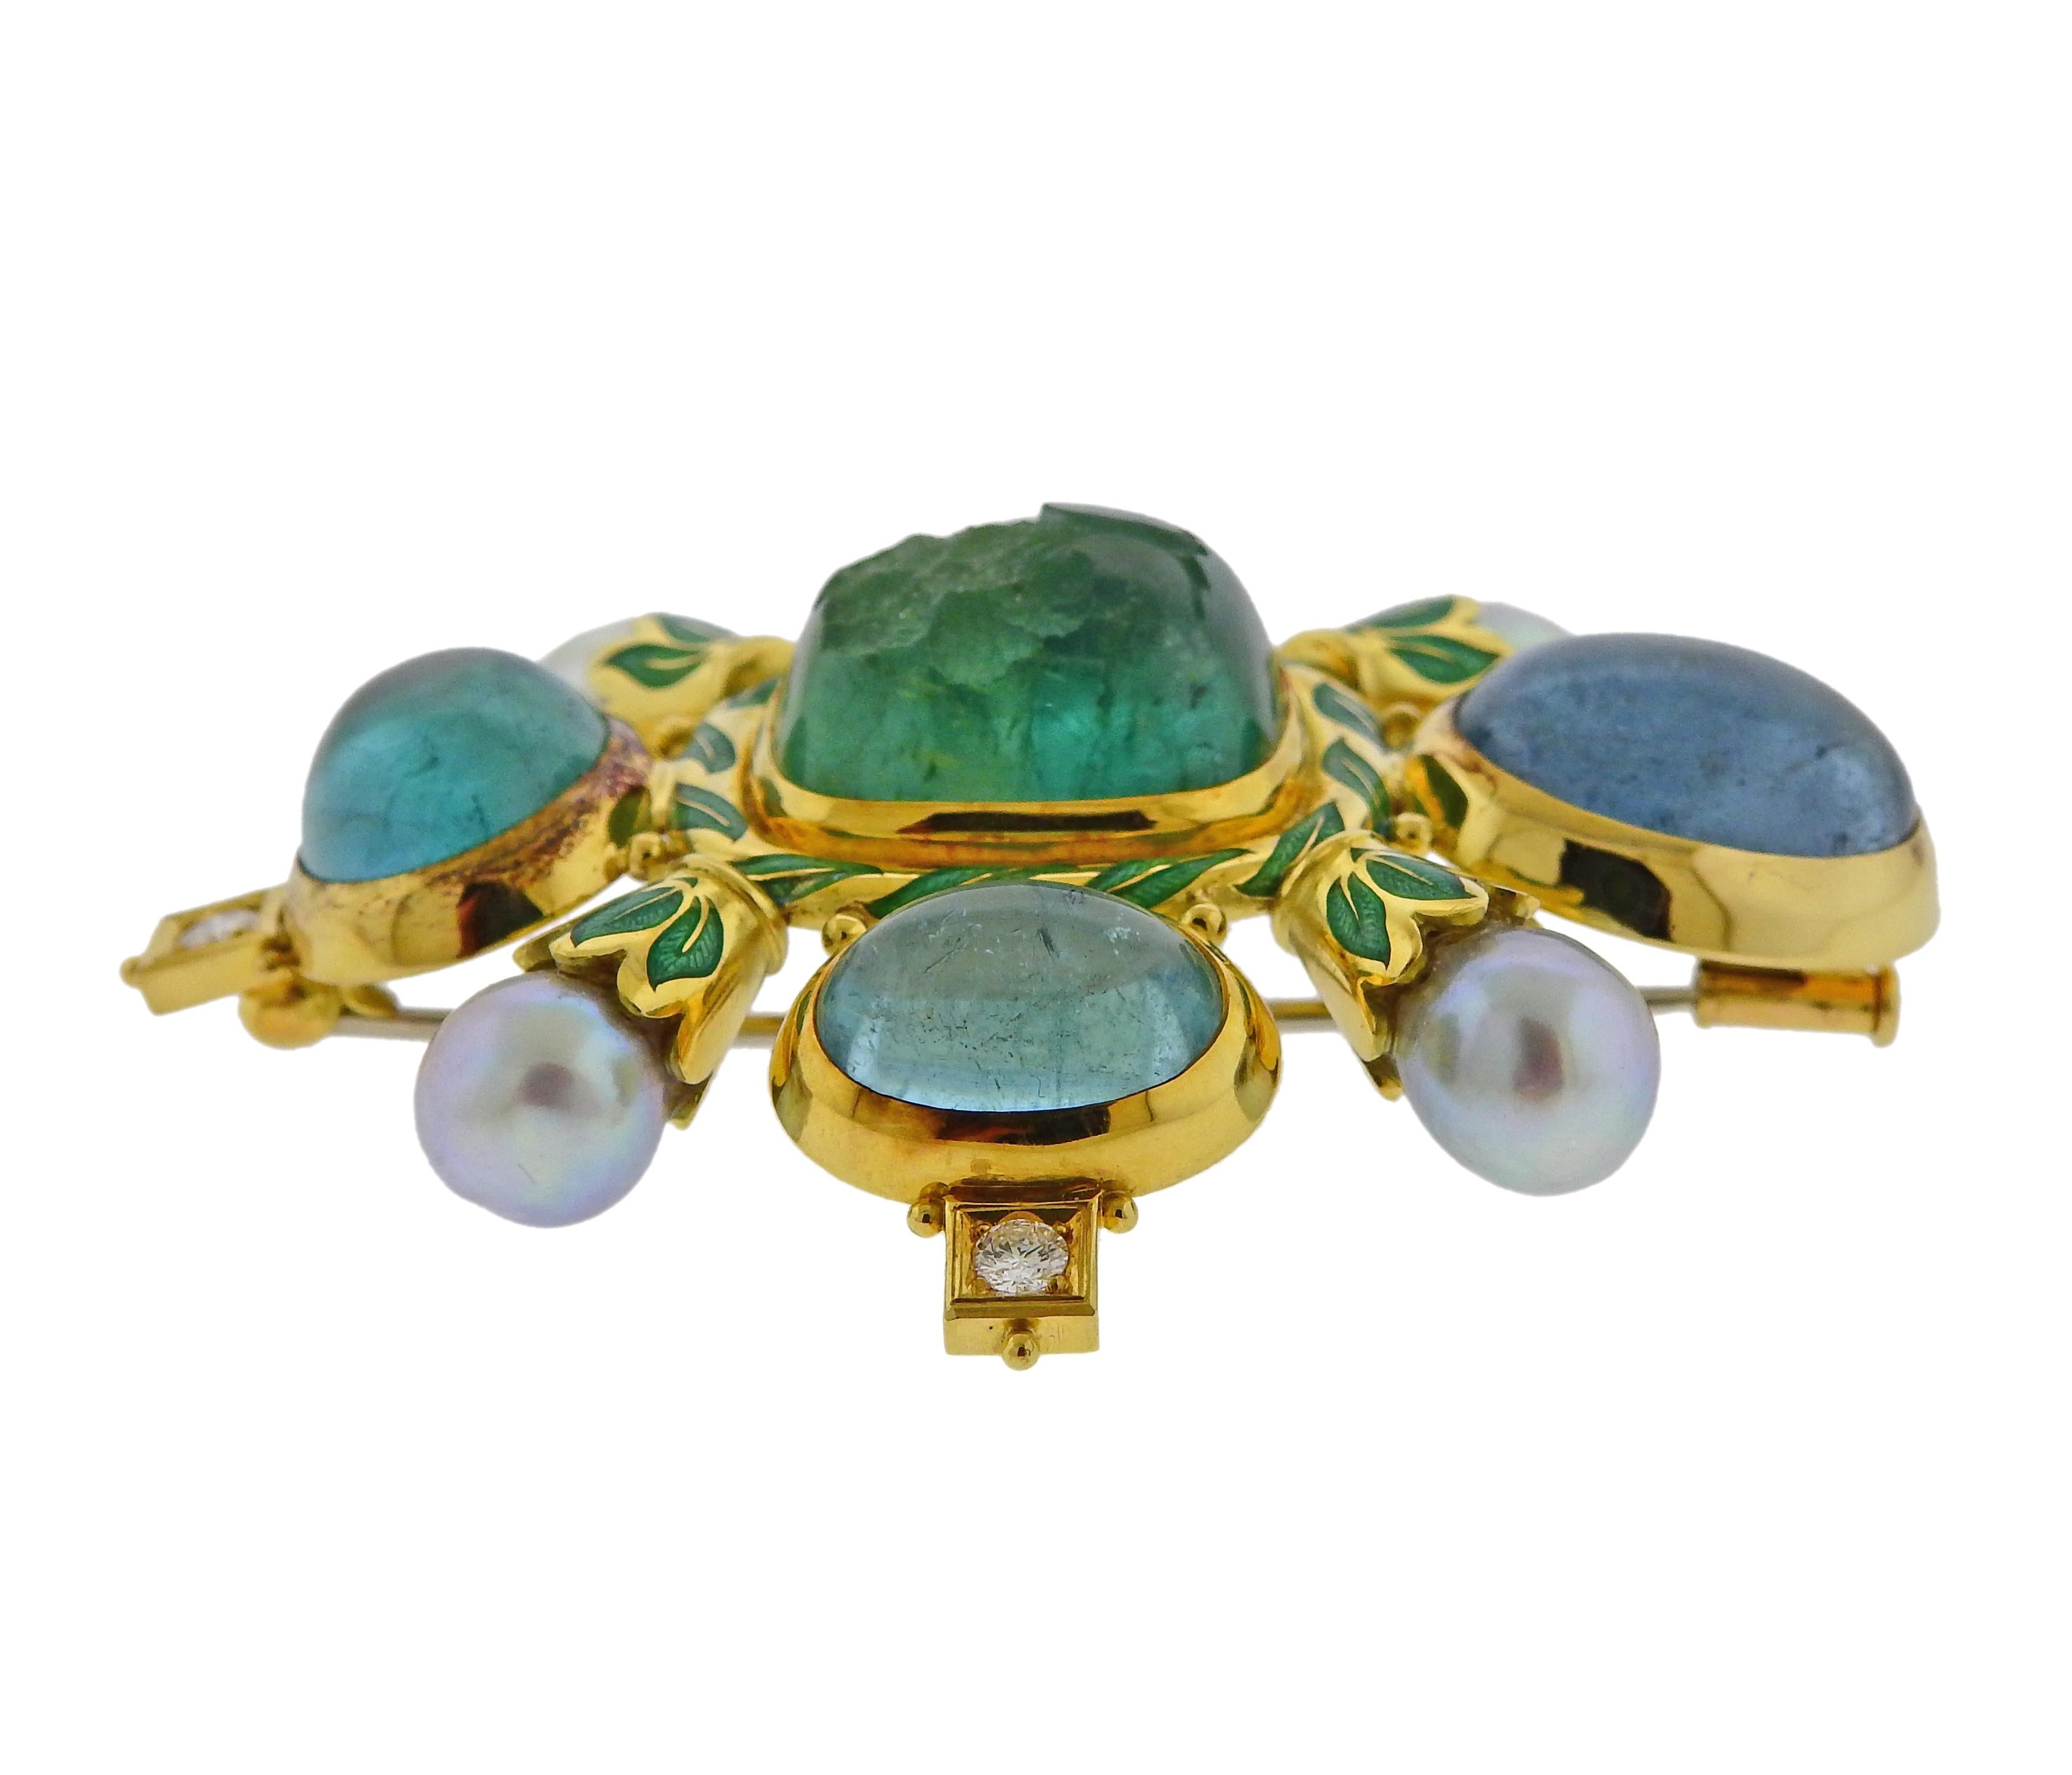 Impressive 18k gold Elizabeth Gage brooch, set with aquamarine cabochons and intaglio, surrounded with 0.40ctw in G/VS diamonds and pearls. Brooch is 65mm x 58mm. Weight is 55.6 grams. Marked:  Gage, 750, English marks. 